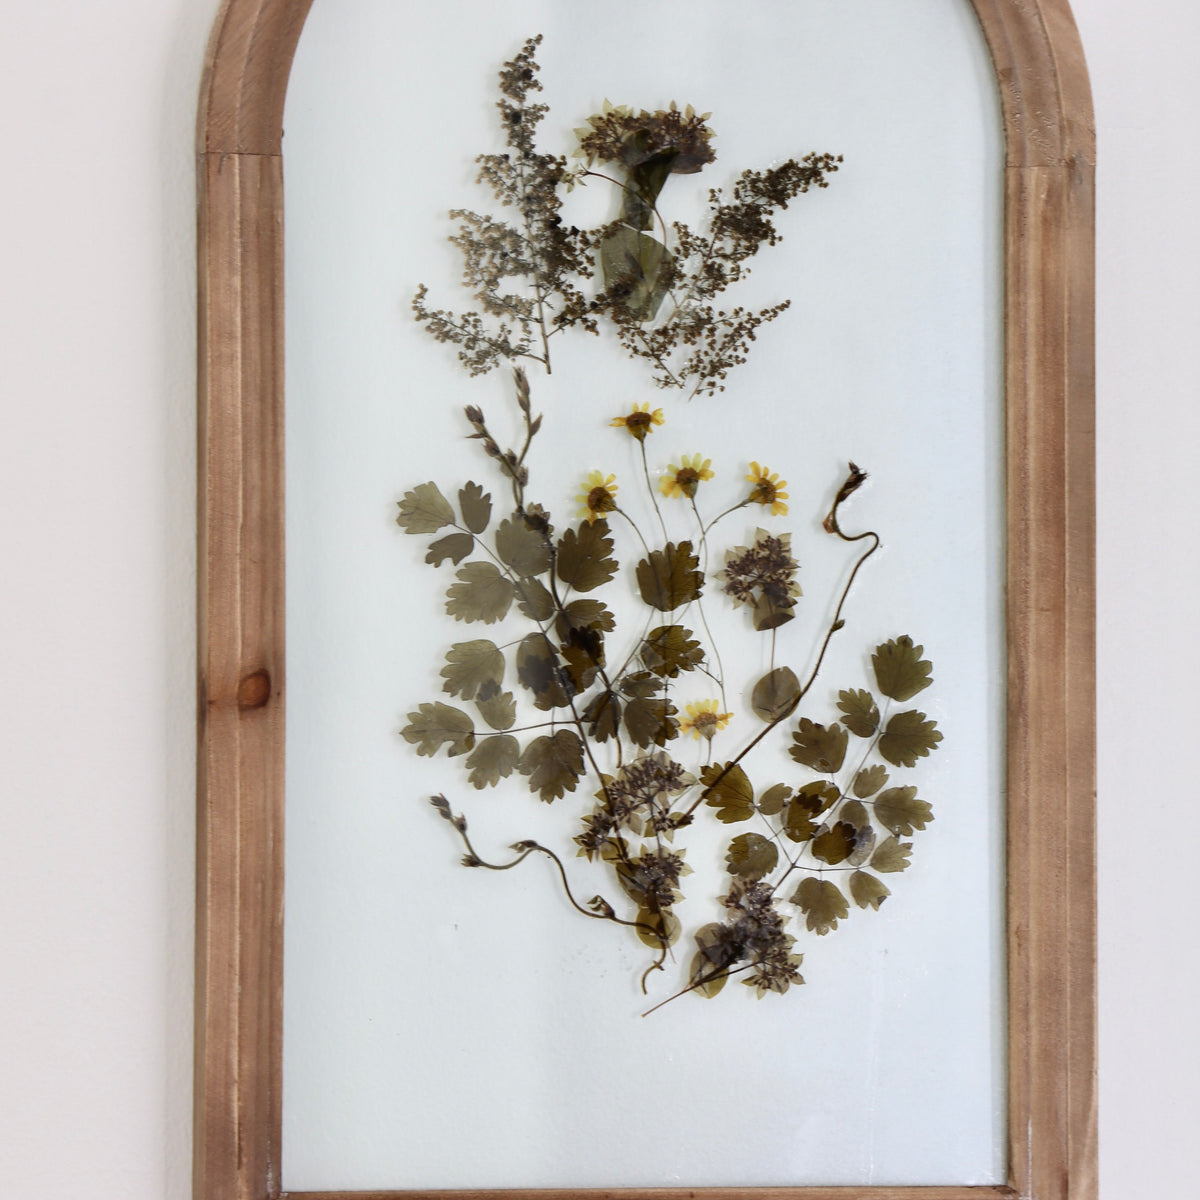 Field of Flowers - Arched Botanical Pressed Flower Art